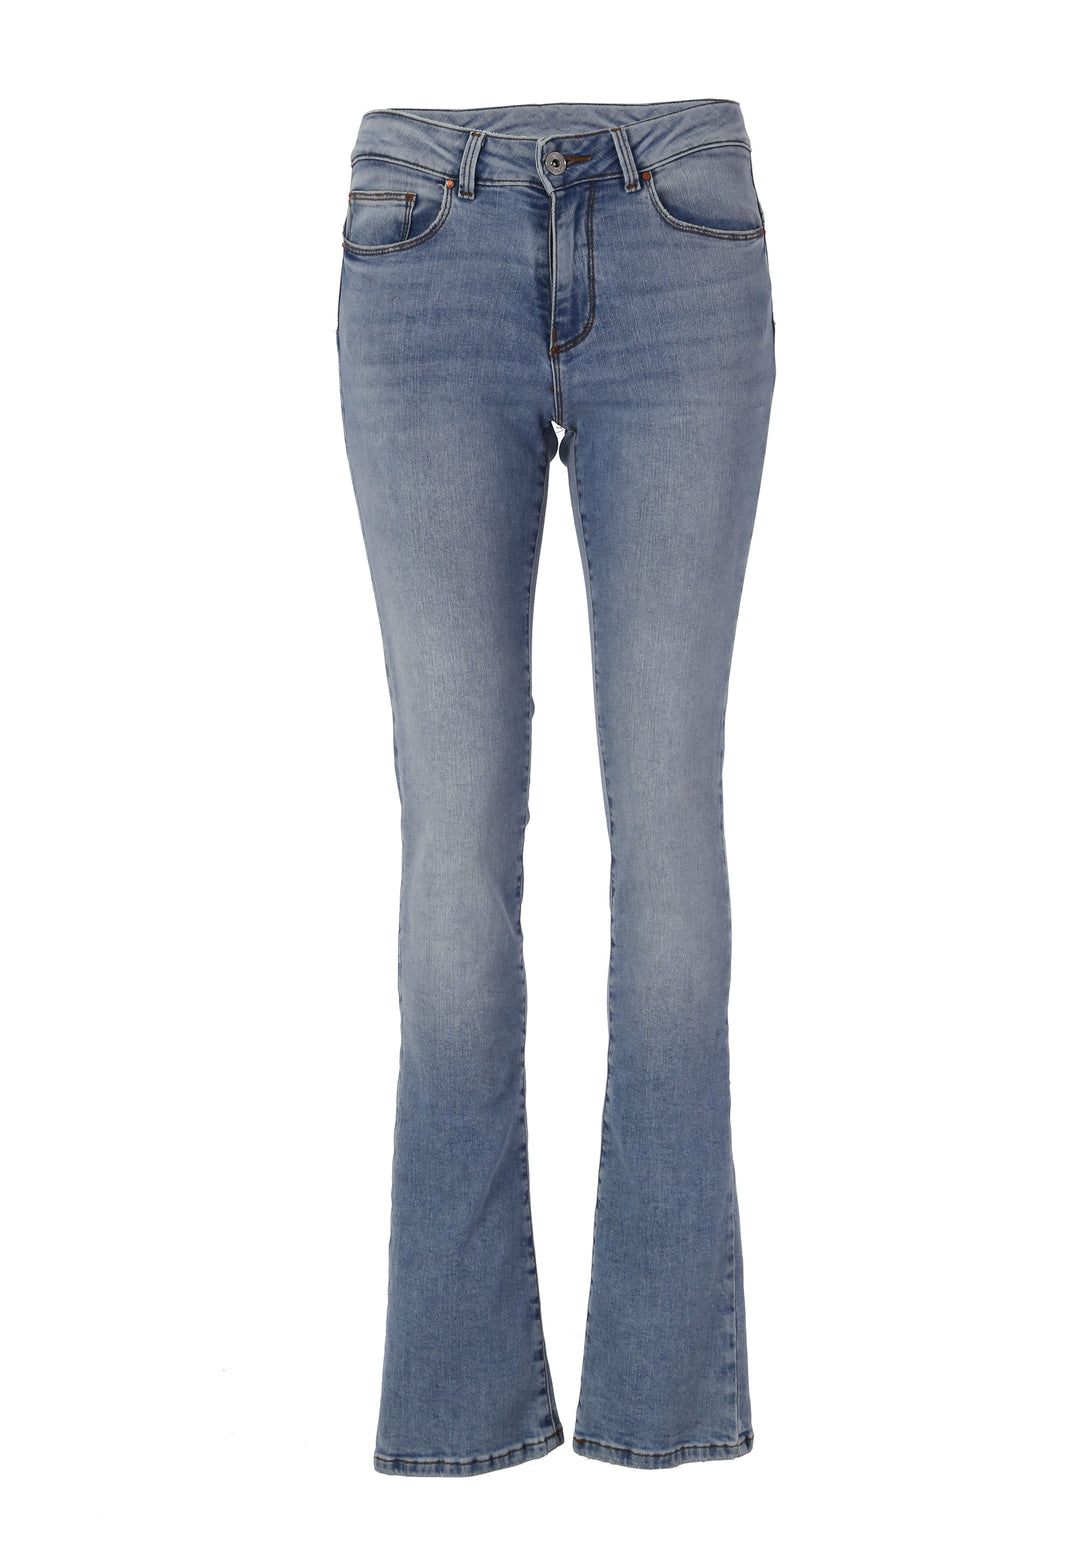 Jeans bootcut in denim con lavaggio medio bleached FP24SV8020D40103-062 Fracomina